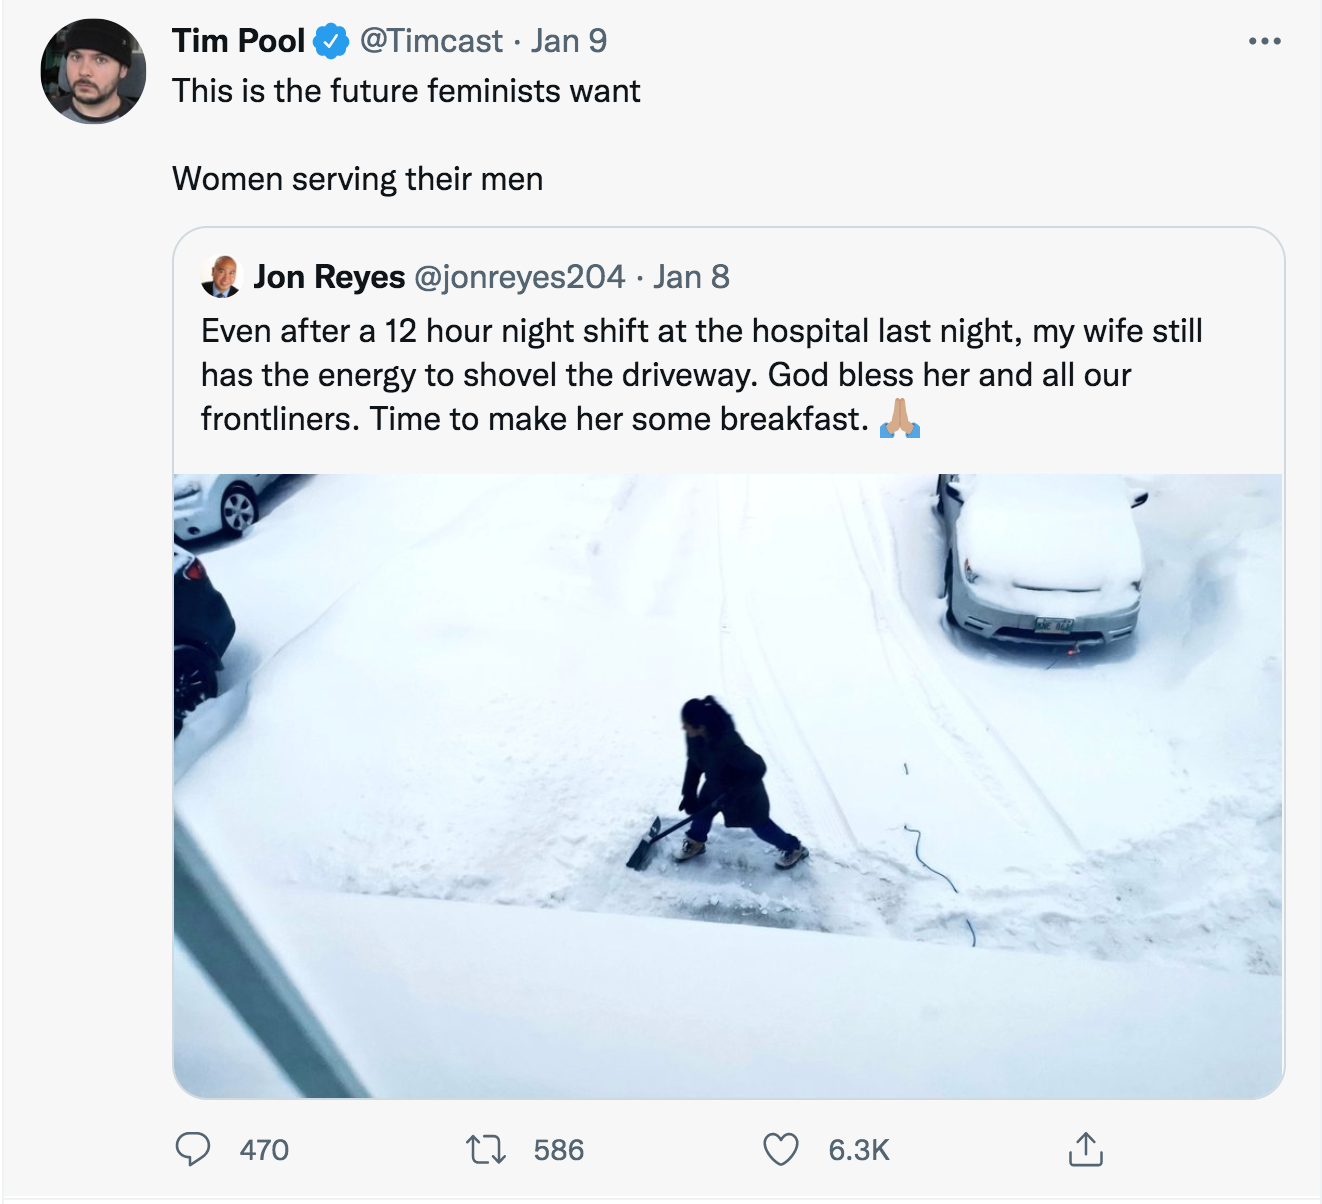 Husband Roasts For Snow Shoveling Tweet - snow - ... Tim Pool . Jan 9 This is the future feminists want Women serving their men Jon Reyes Jan 8 Even after a 12 hour night shift at the hospital last night, my wife still has the energy to shovel the drivewa